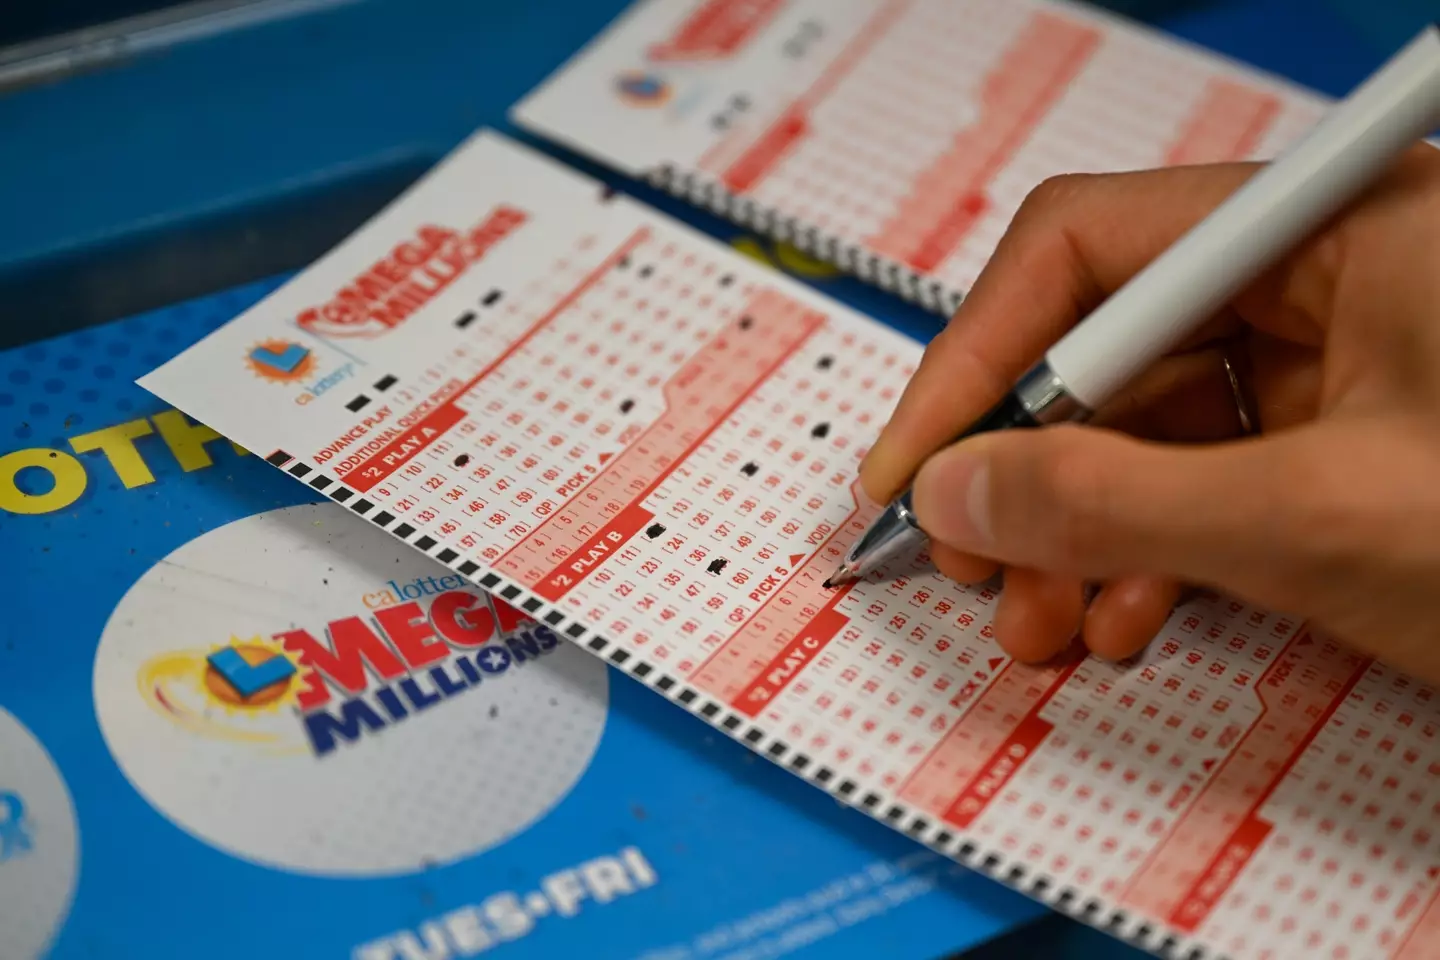 The winning numbers for this $1.58 billion jackpot were 13, 19, 20, 32, 33 and the mega ball was 14.